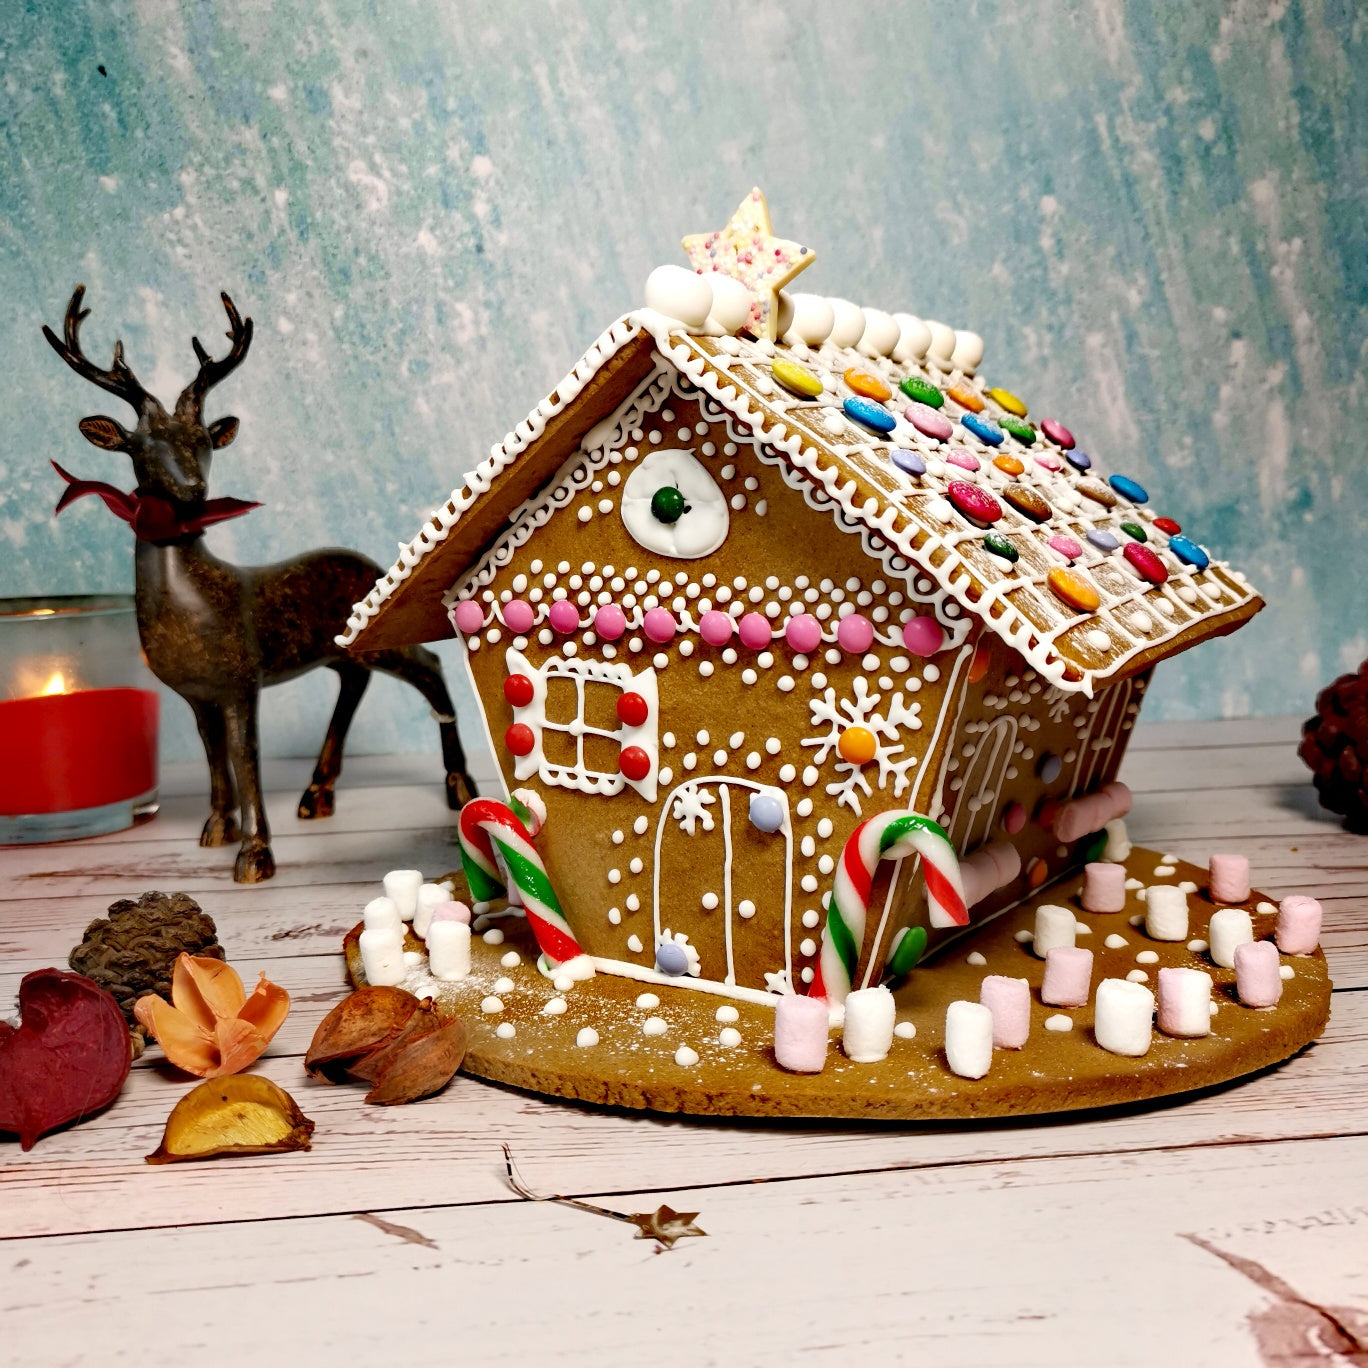 Gingerbread House DIY Christmas Baking Kit - with Full Video Tutorial